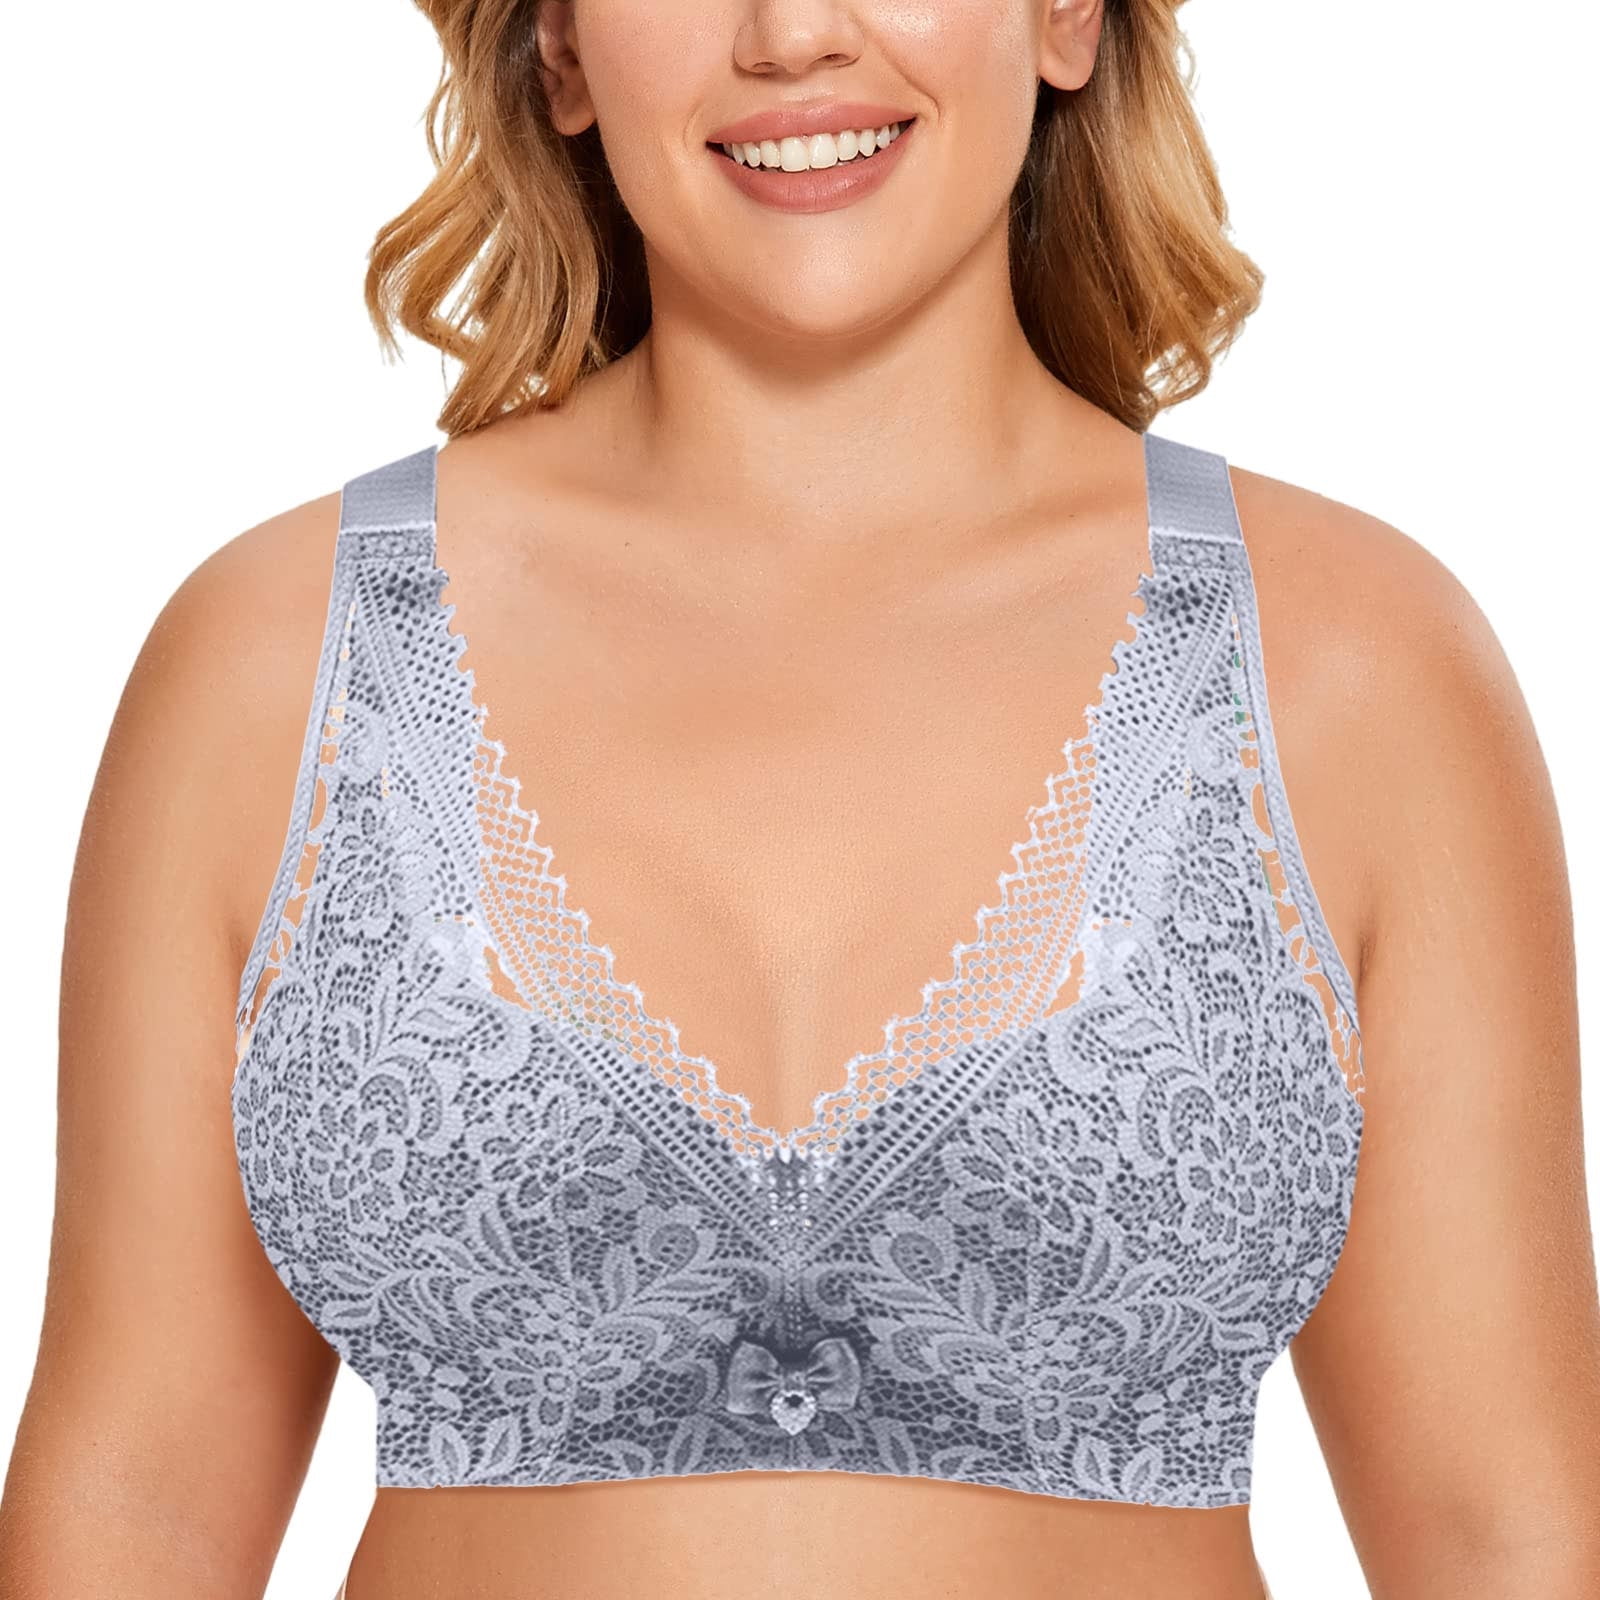 LEEy-World Women'S Lingerie Compression Wirefree High Support Bra for Women  S to Plus Size Everyday Wear, Exercise and Offers Back Support Grey,38/85D